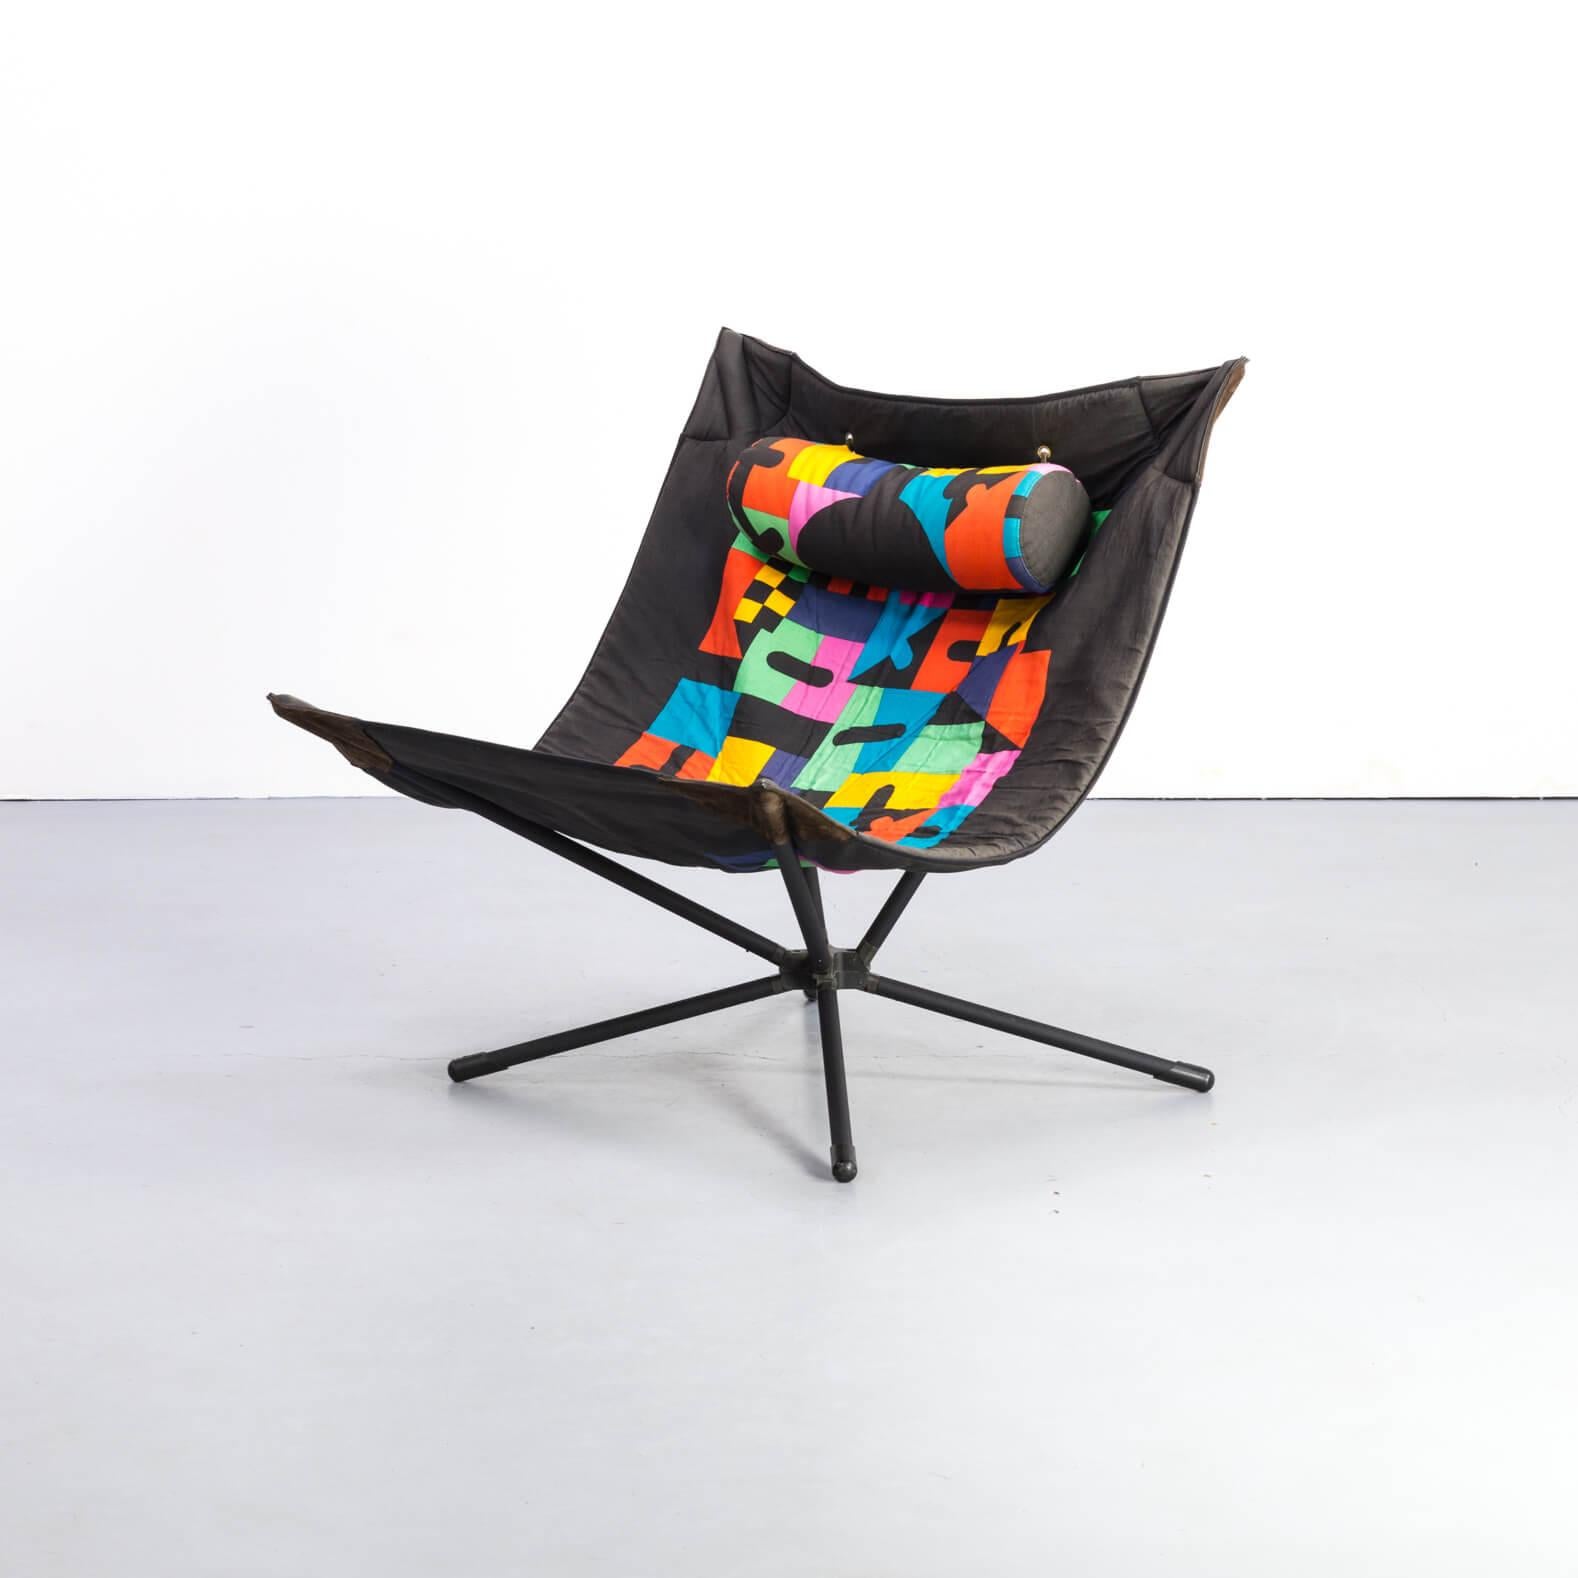 Folding lounge occasional chair in original Missoni Memphis fabric with steel legs by Alberto Salviati and Ambrogio Tresoldi for Saporiti. Excellent condition consistent with age and use.